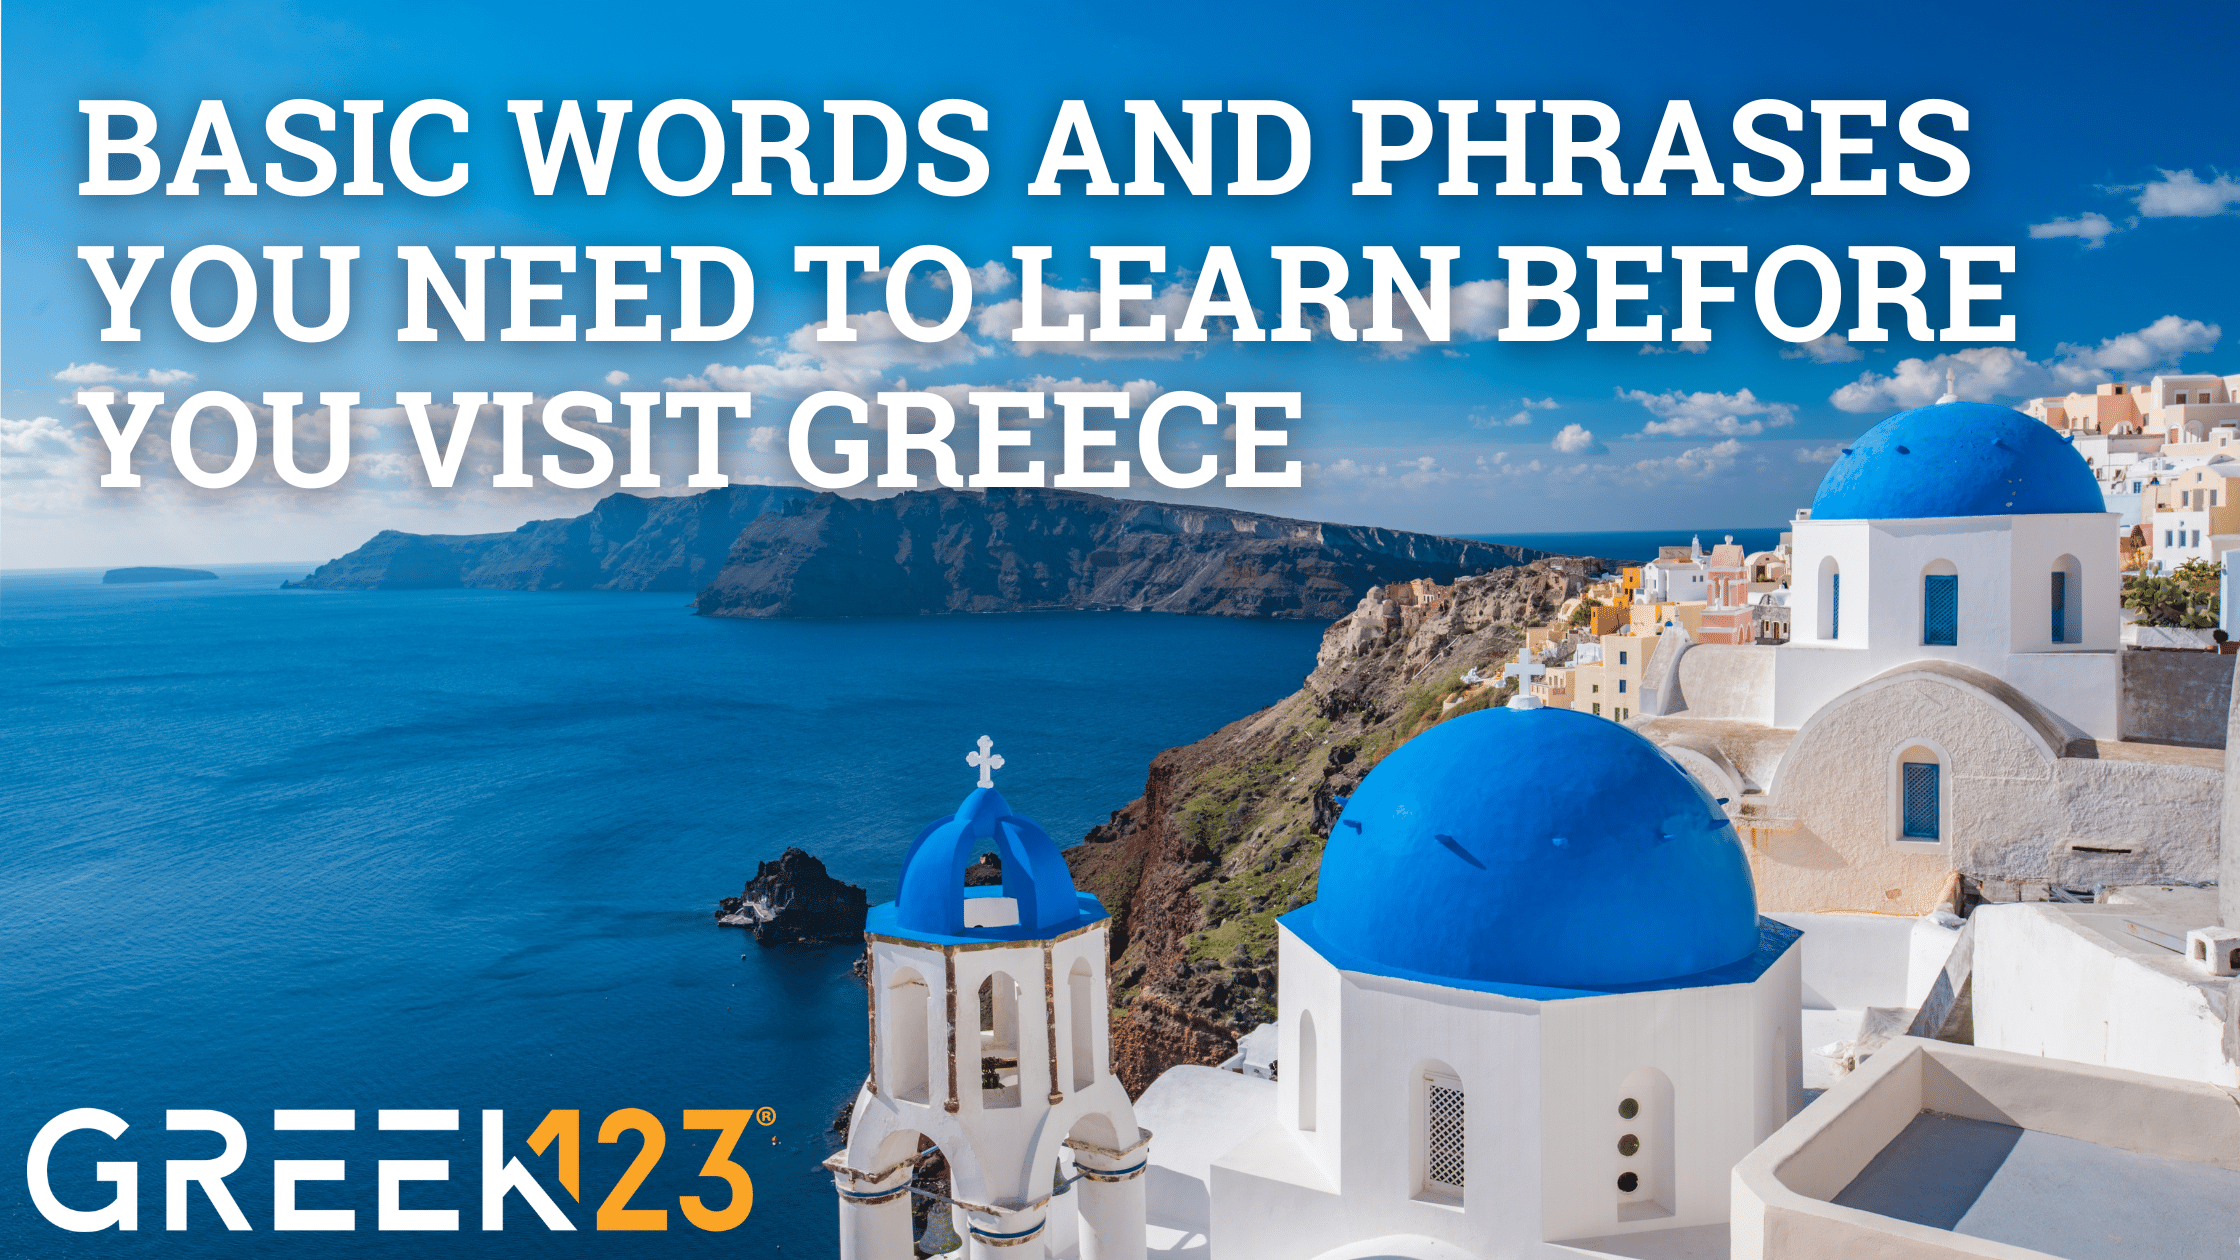 Basic words and phrases you need to learn before you visit Greece